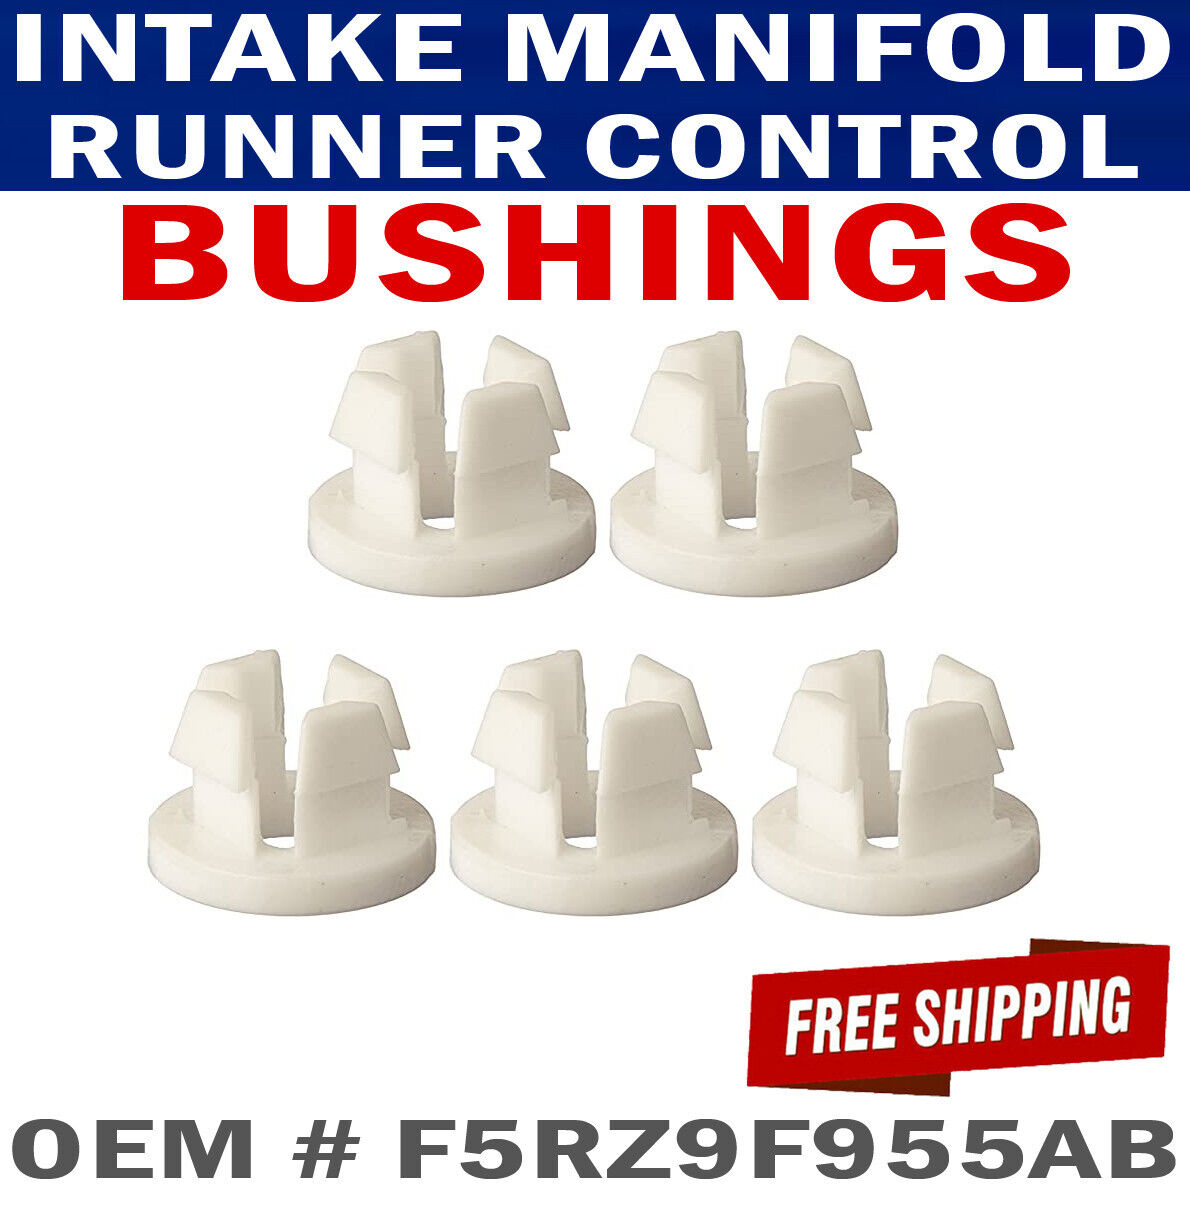 5 Intake Manifold Runner Control Bushing IMRC Clips for Ford Lincoln Mercury NEW